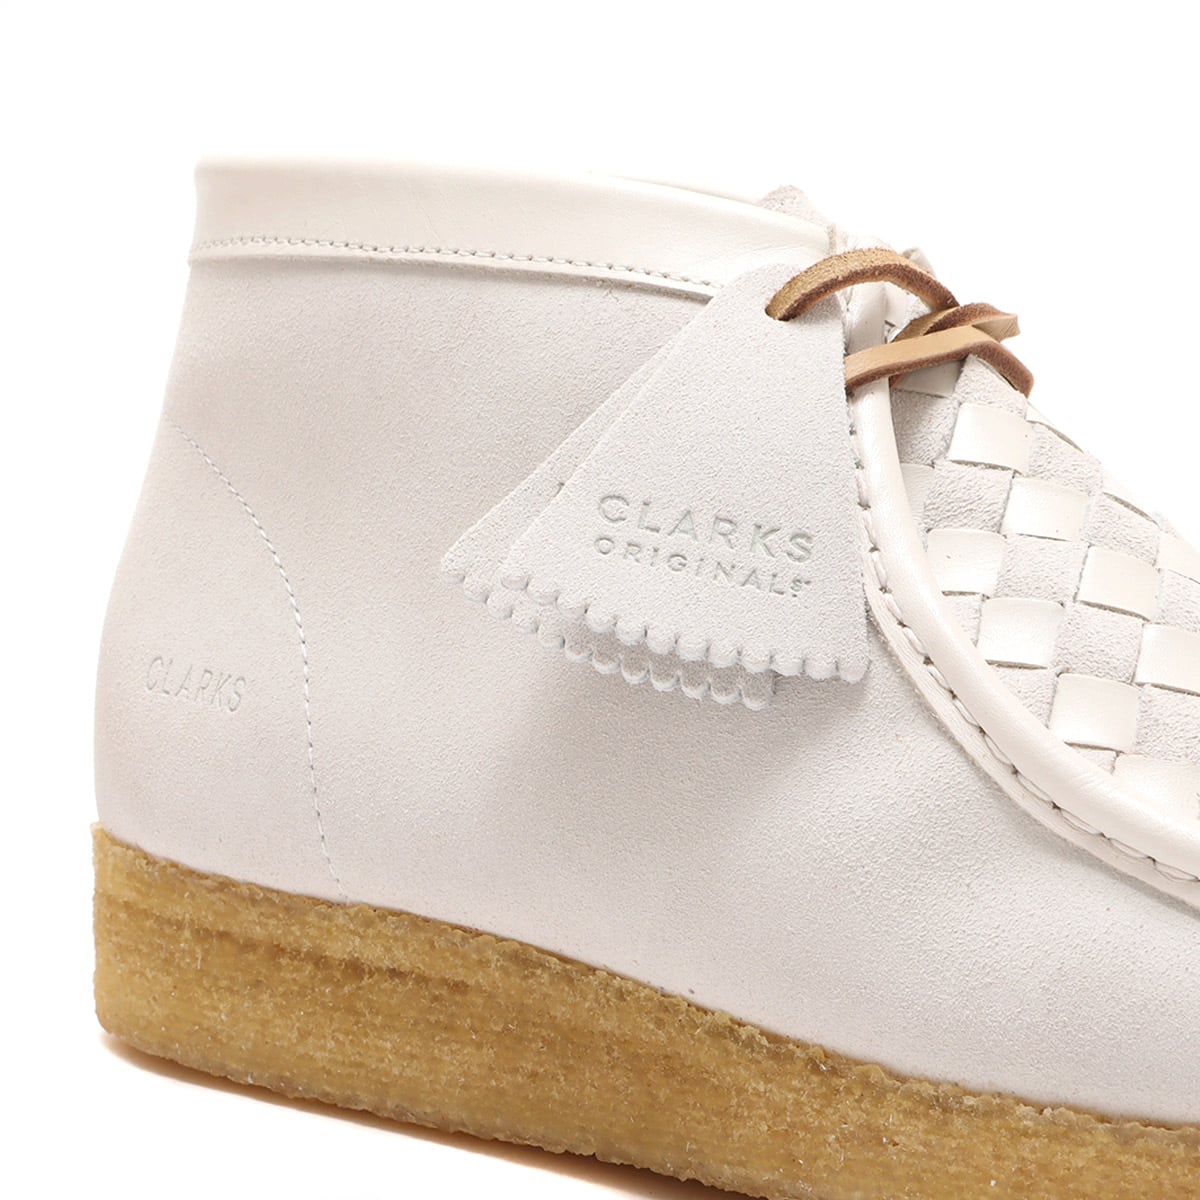 Clarks Wallabee Boot White Woven 21SP-I